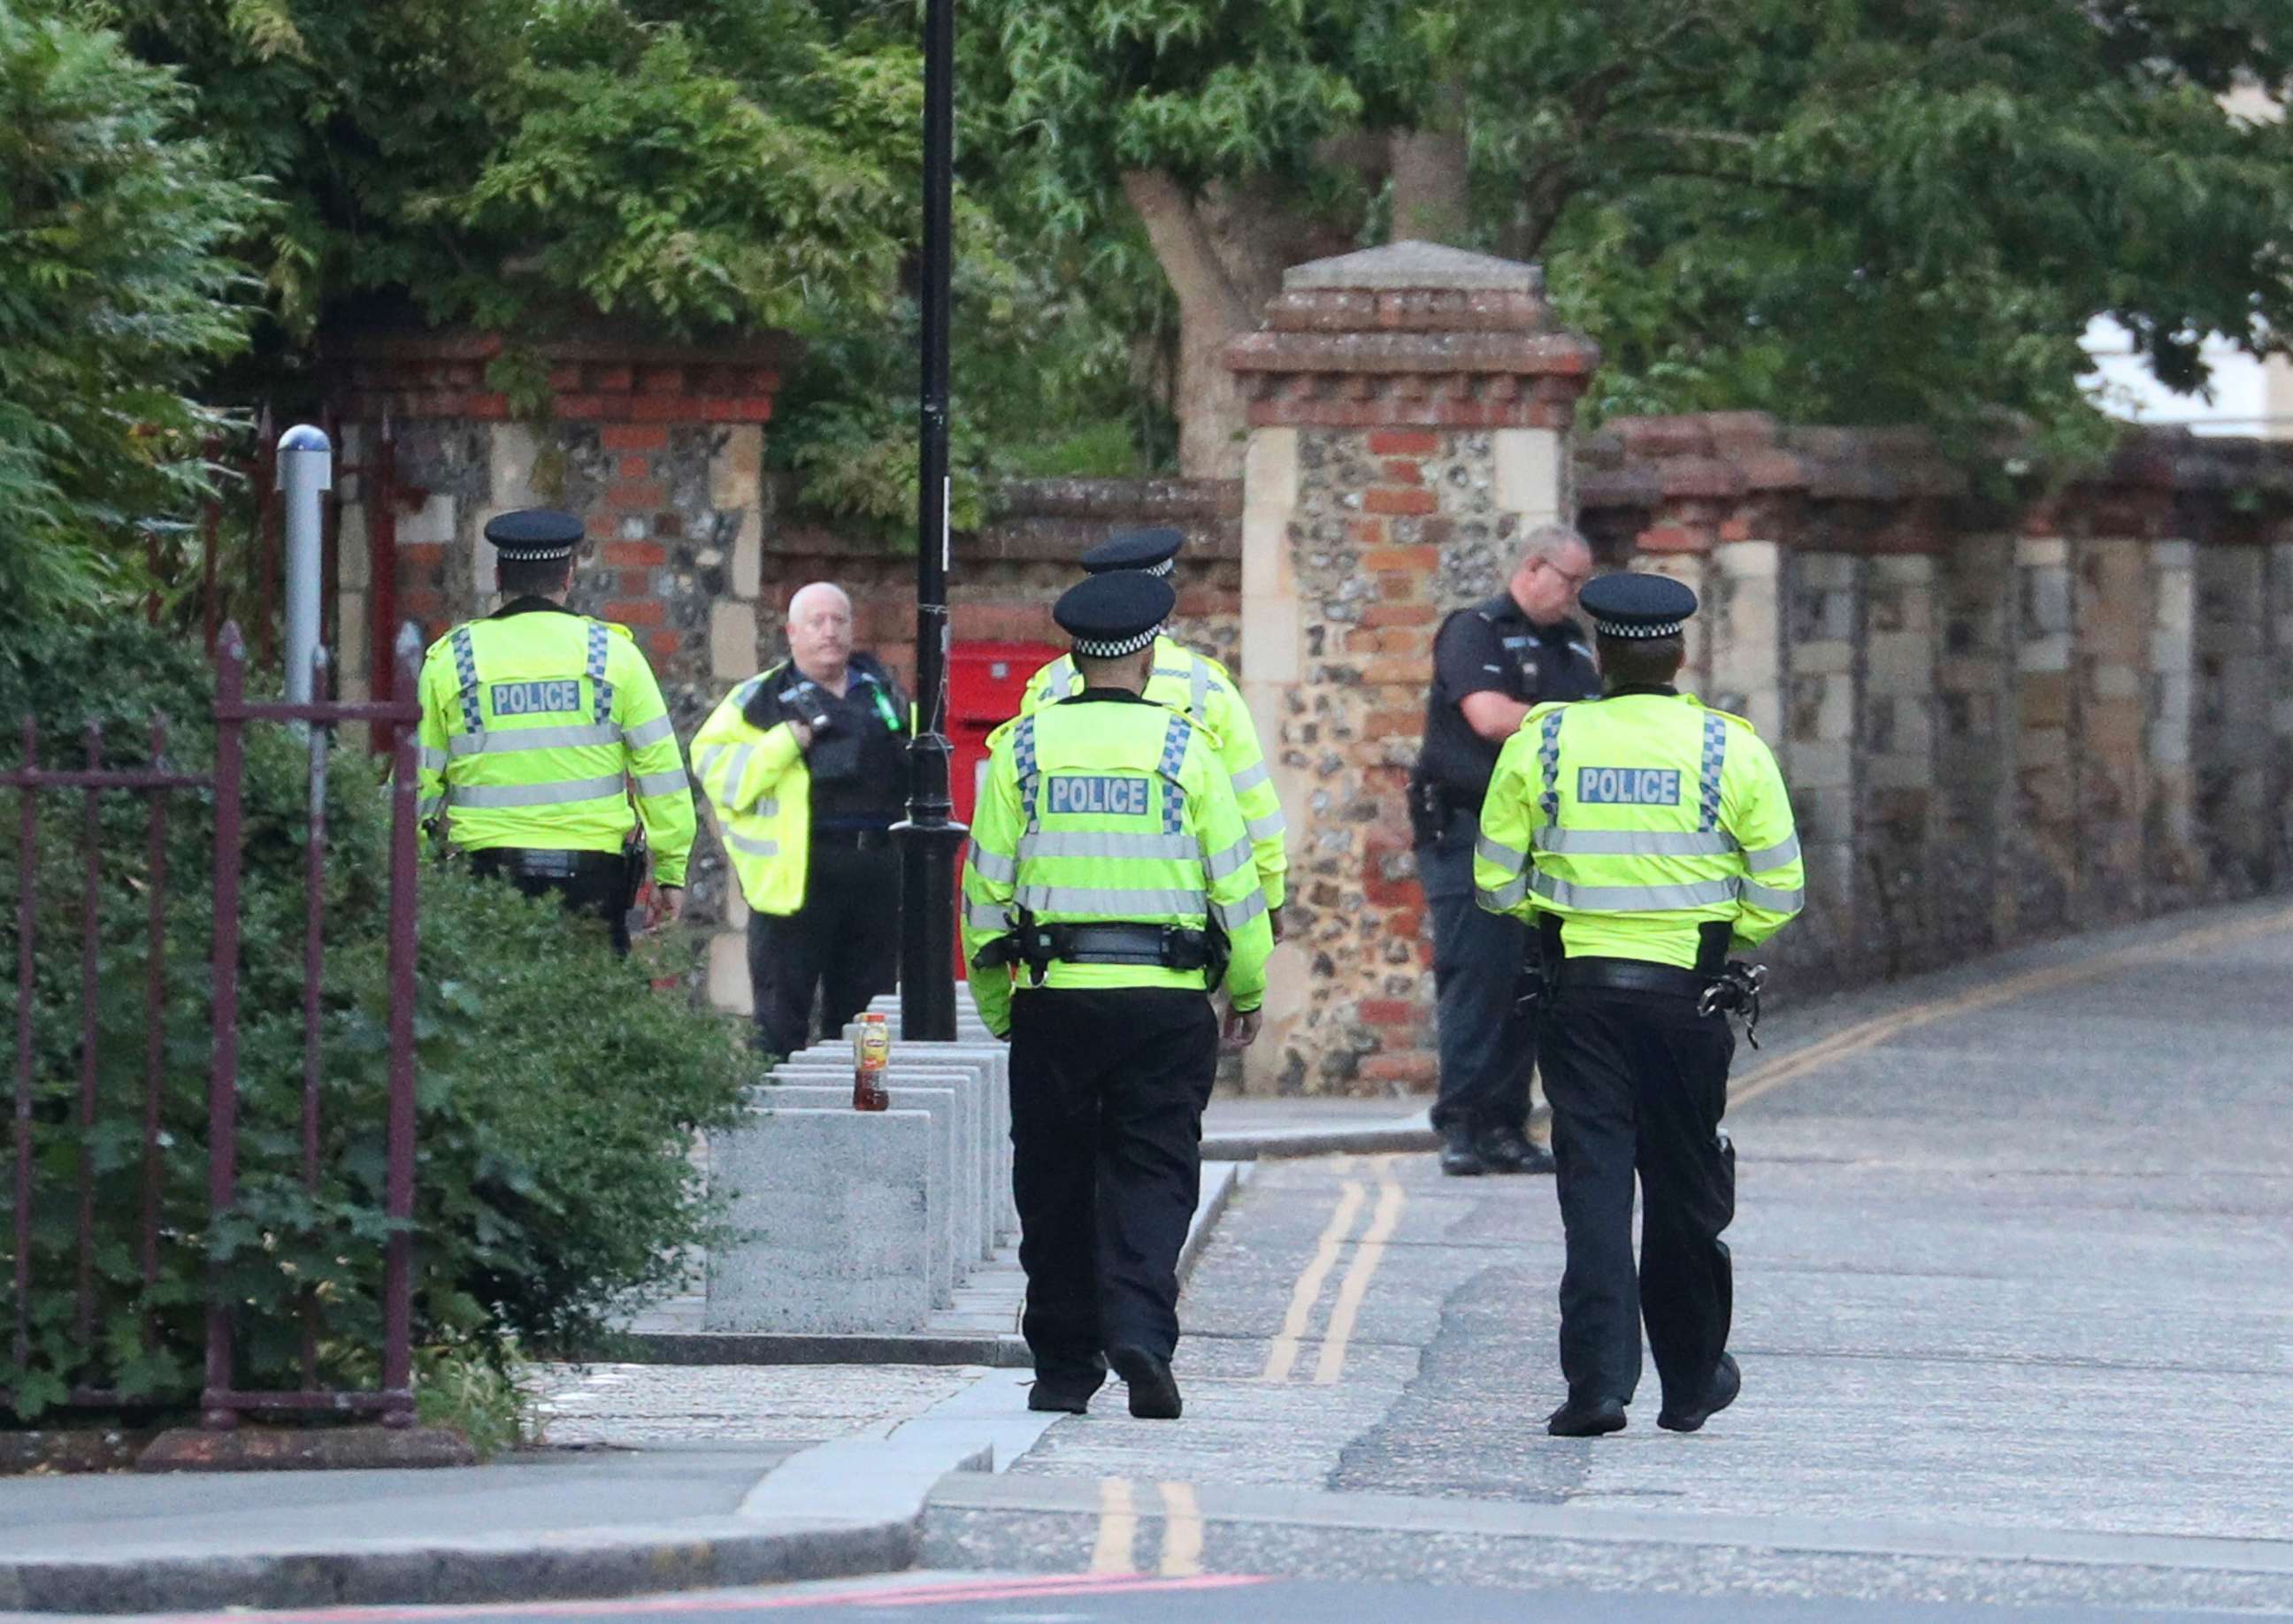 PHOTO: Police arrive at Forbury Gardens in the town centre of Reading, England, where they are responding to a "serious incident" Saturday, June 20, 2020.